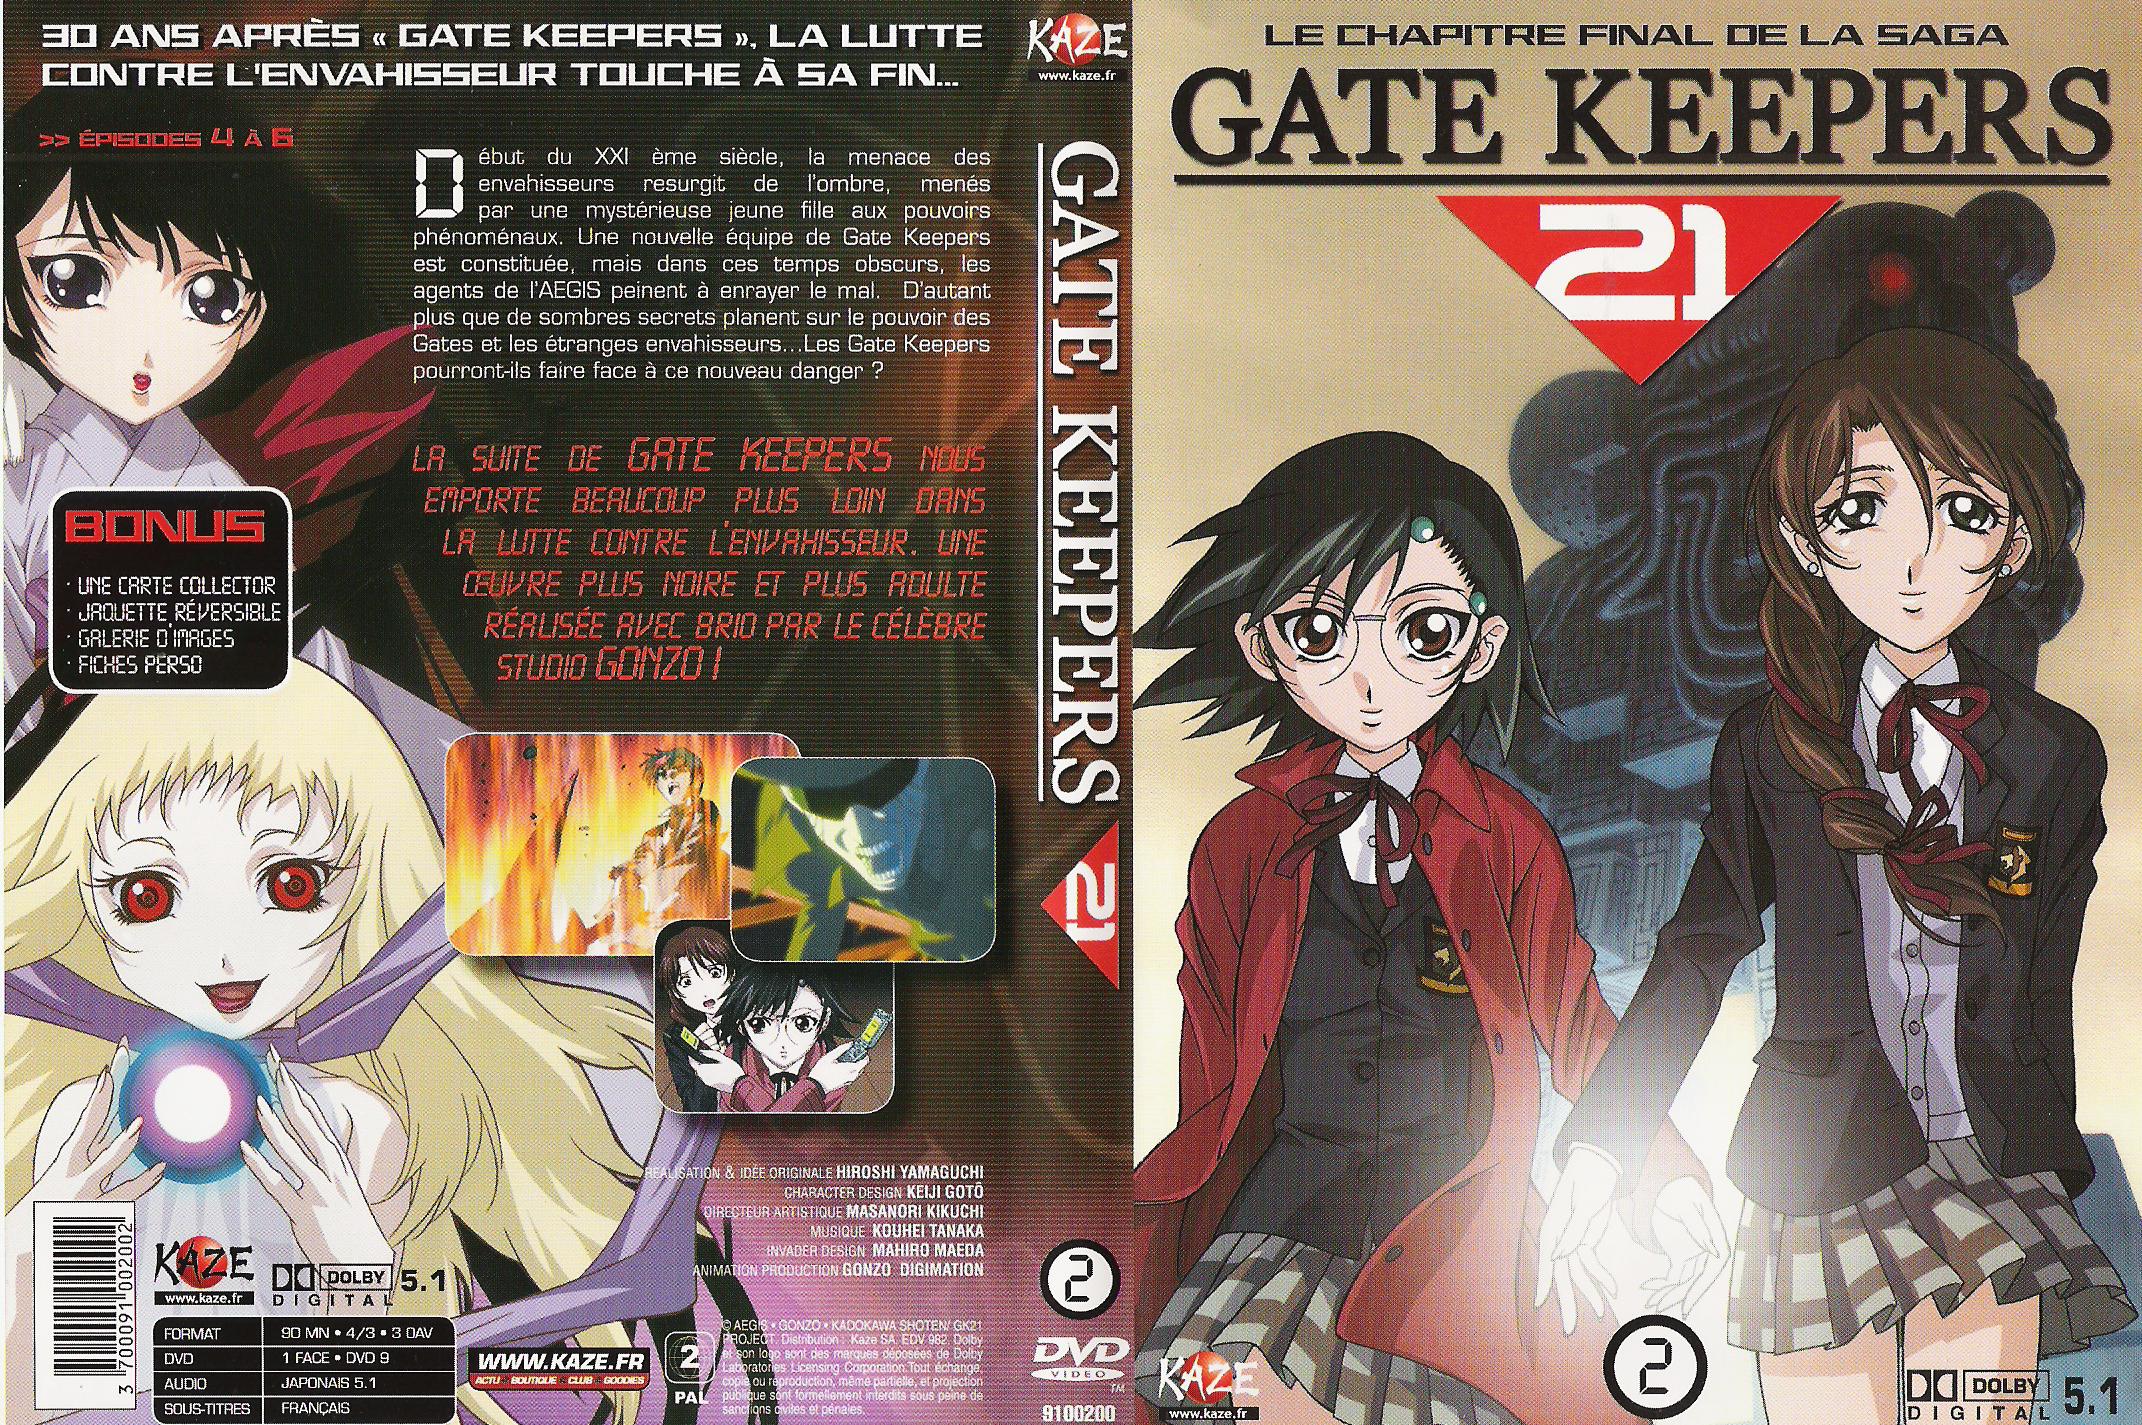 Jaquette DVD Gate Keepers 21 DVD 2 v2